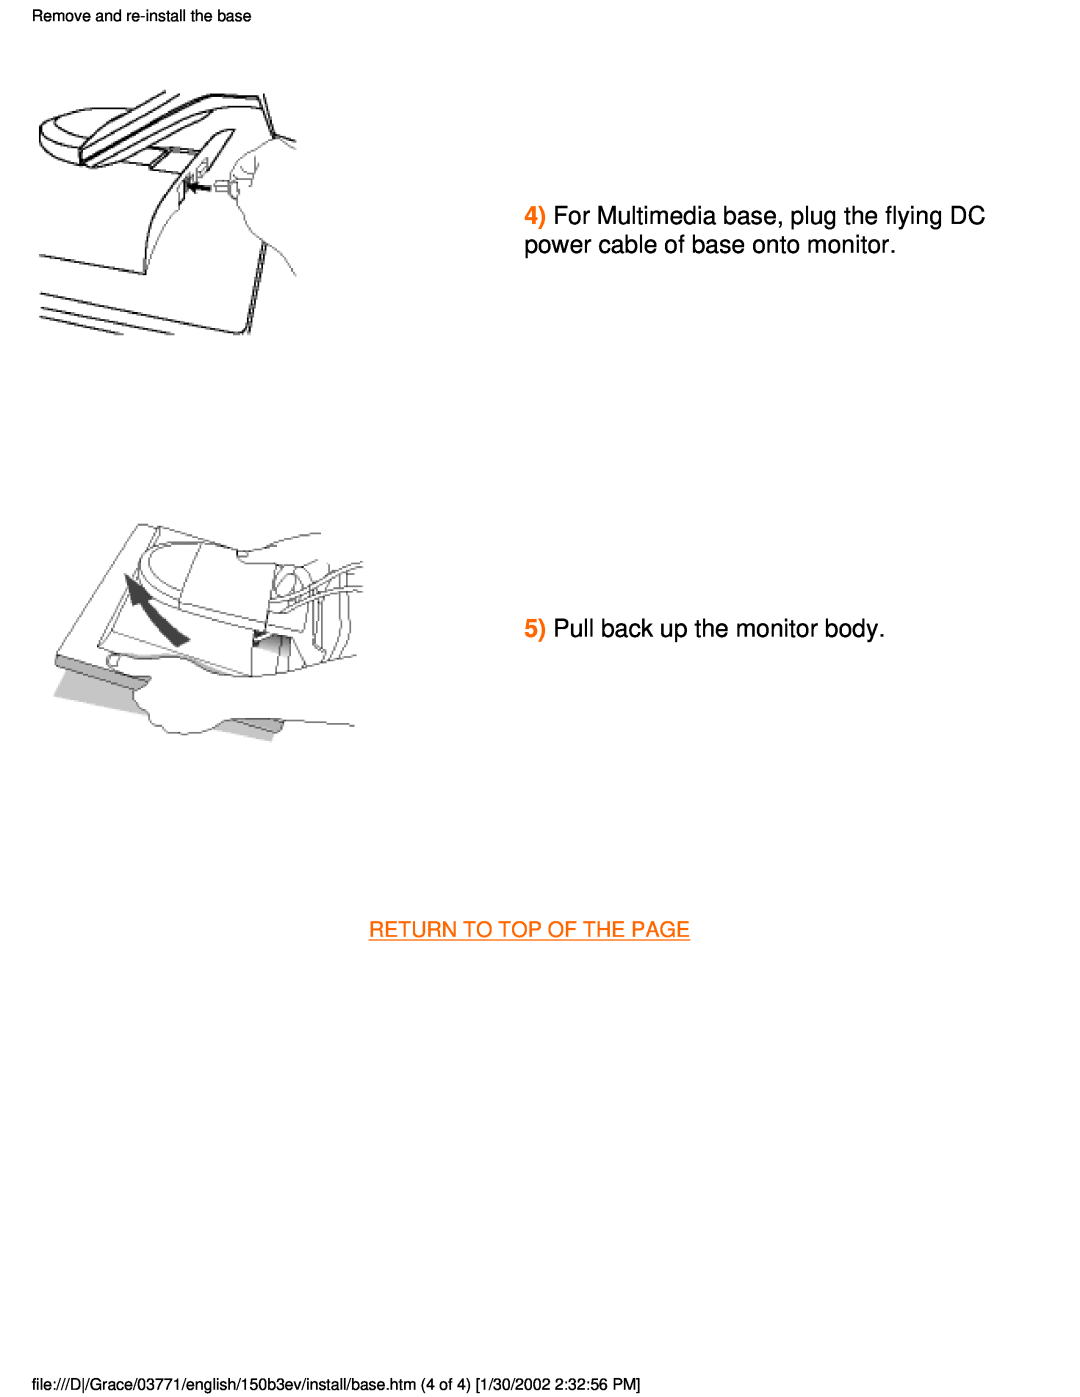 Philips 150B3E, 150B3V user manual Pull back up the monitor body, Return To Top Of The Page, Remove and re-install the base 